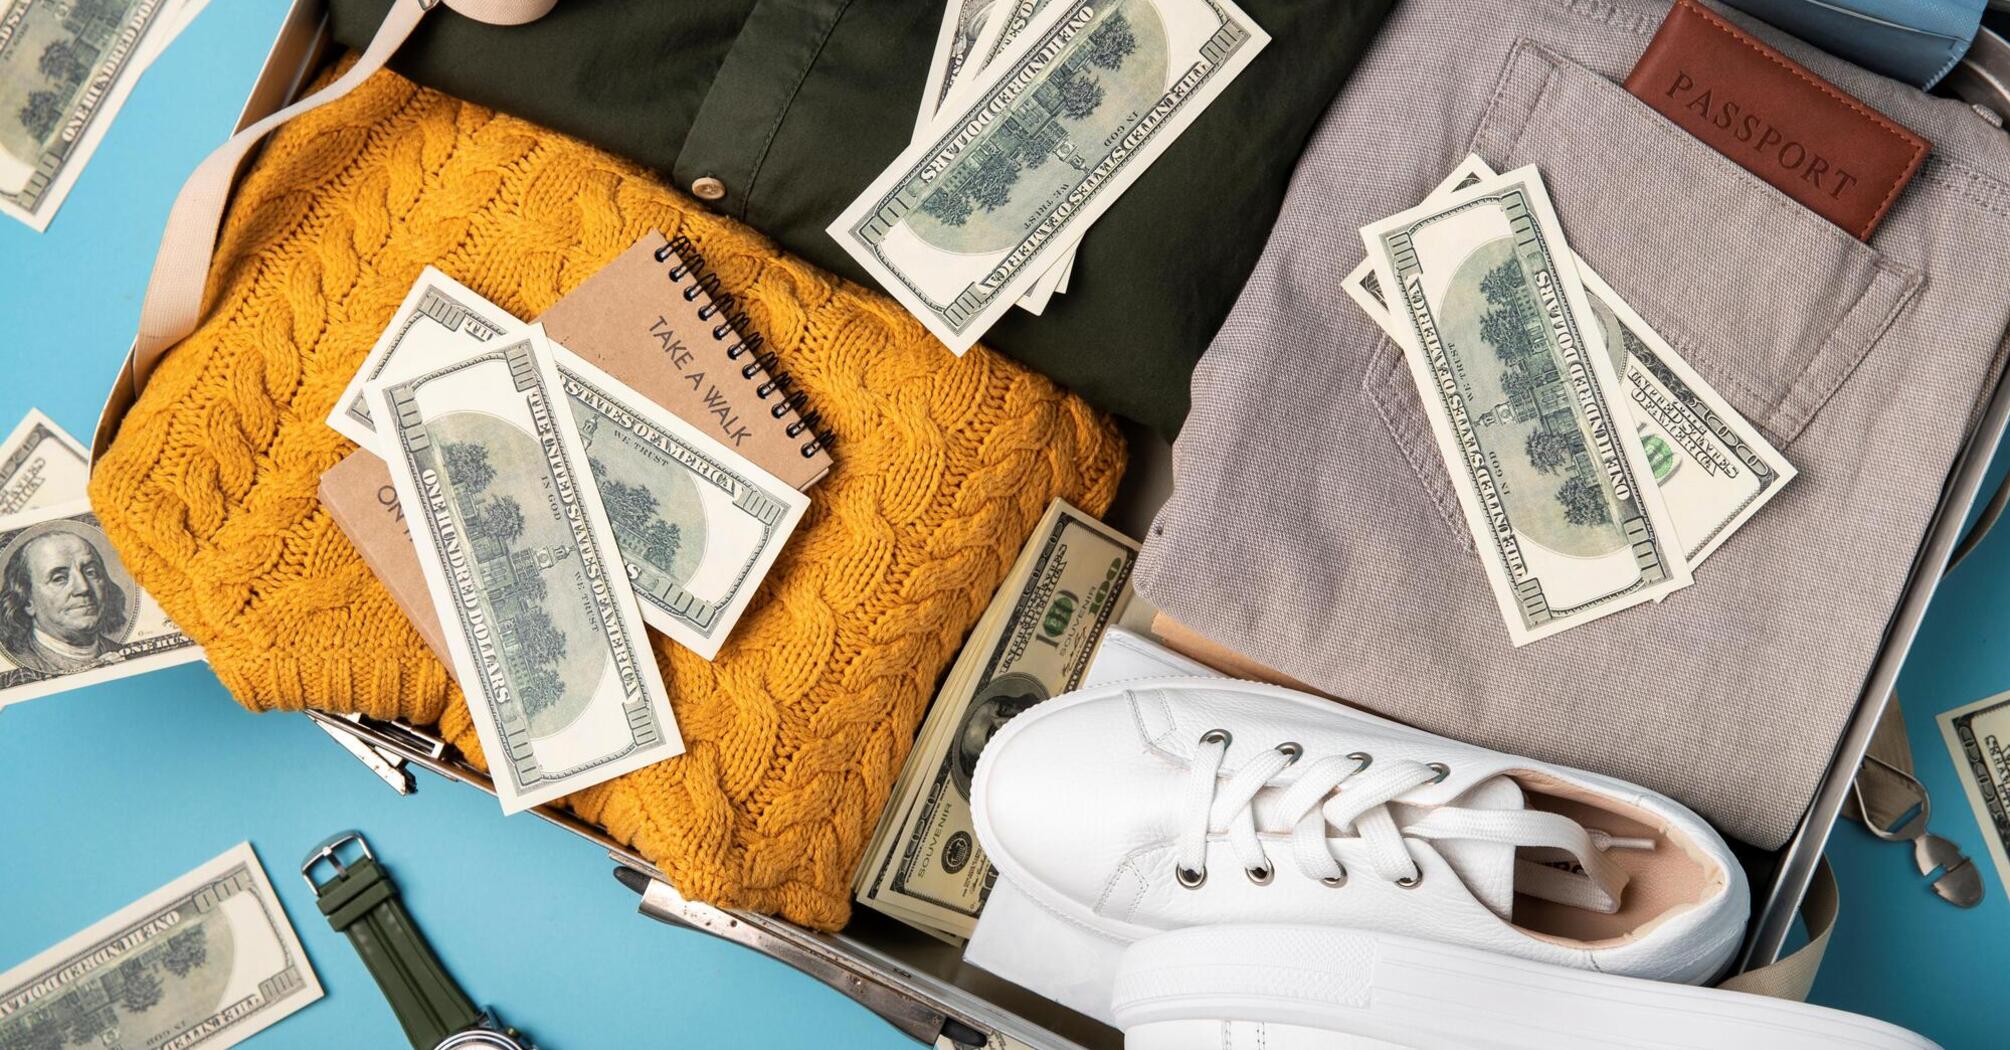 7 habits that will help you save money during vacation